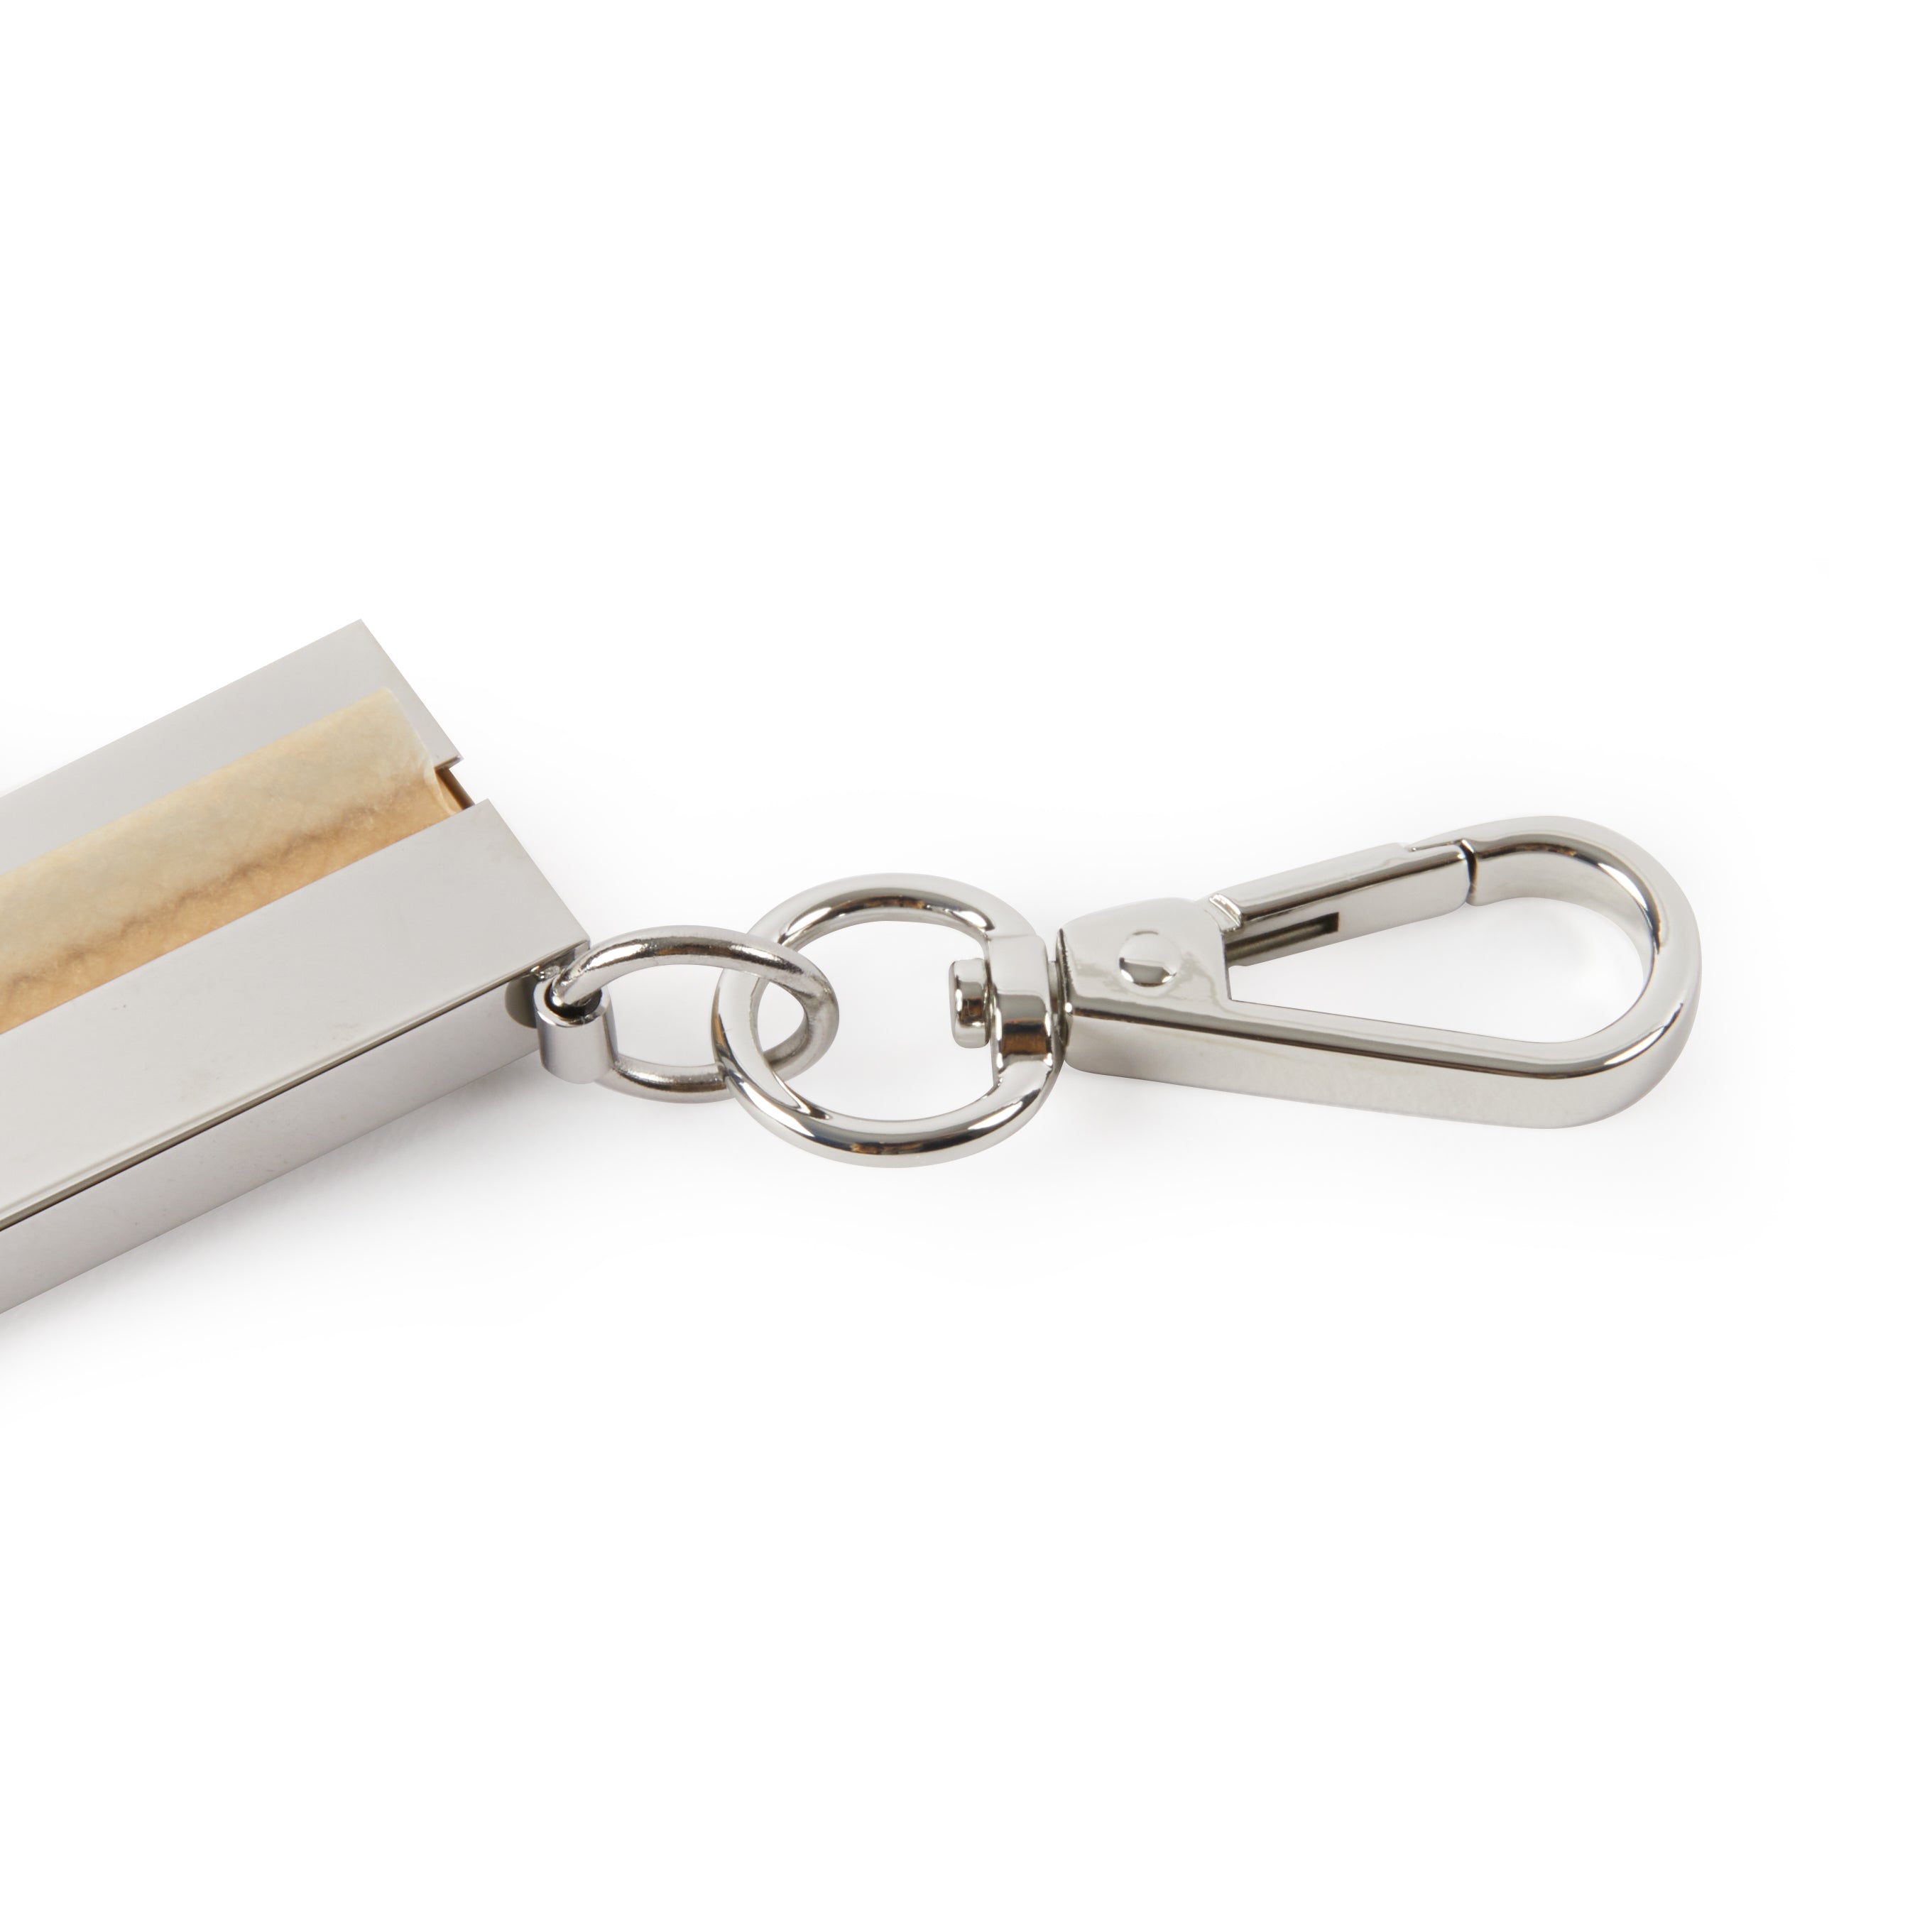 PAPERS DISPENSER KEYCHAIN